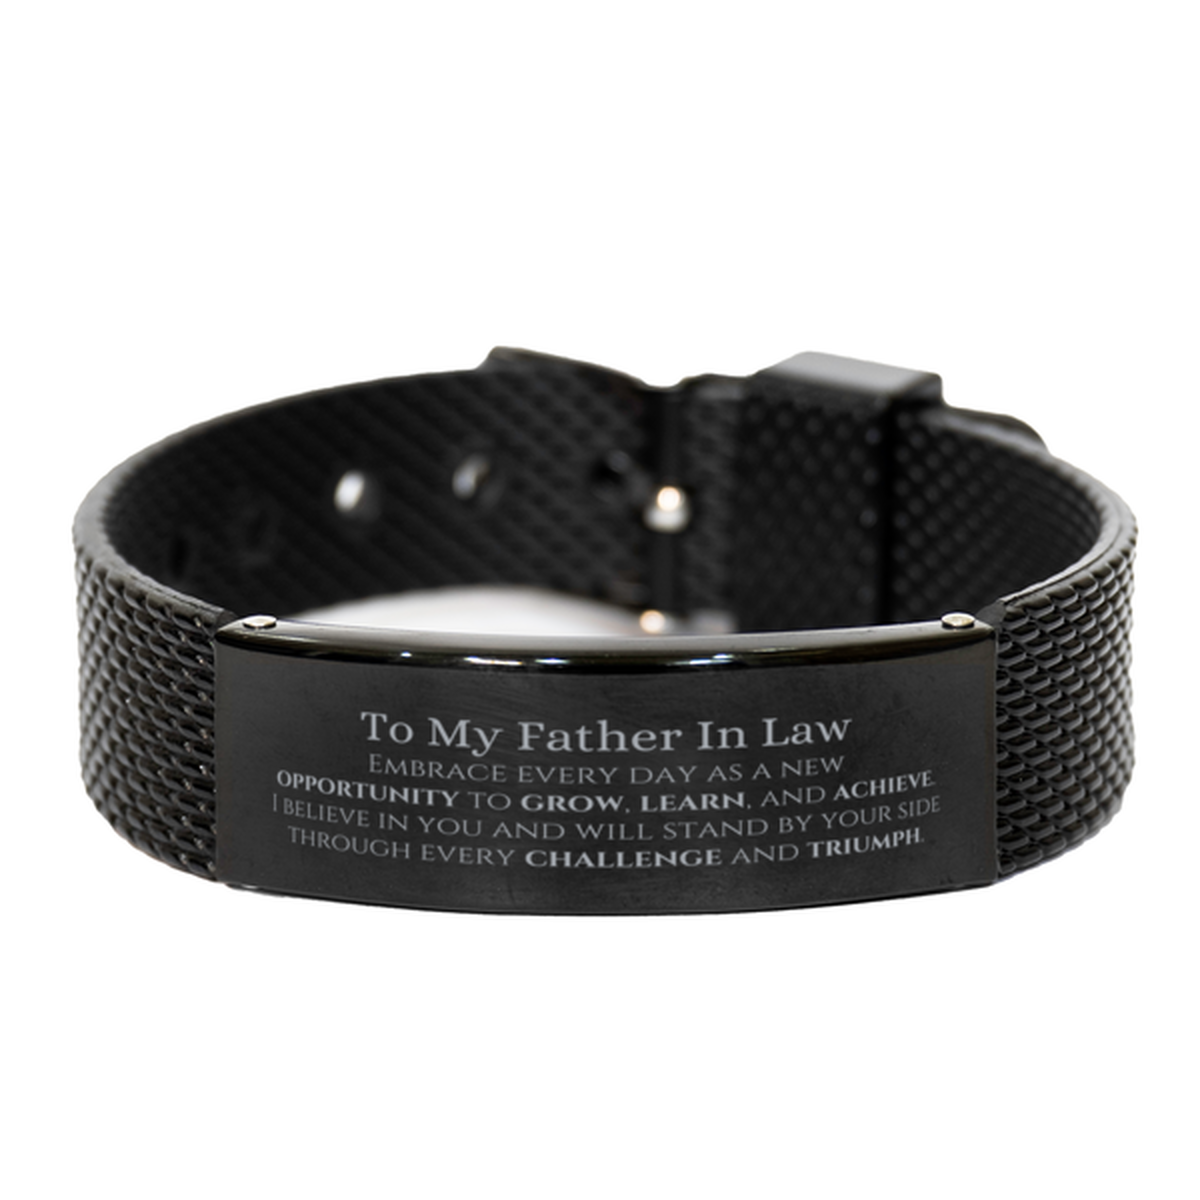 To My Father In Law Gifts, I believe in you and will stand by your side, Inspirational Black Shark Mesh Bracelet For Father In Law, Birthday Christmas Motivational Father In Law Gifts